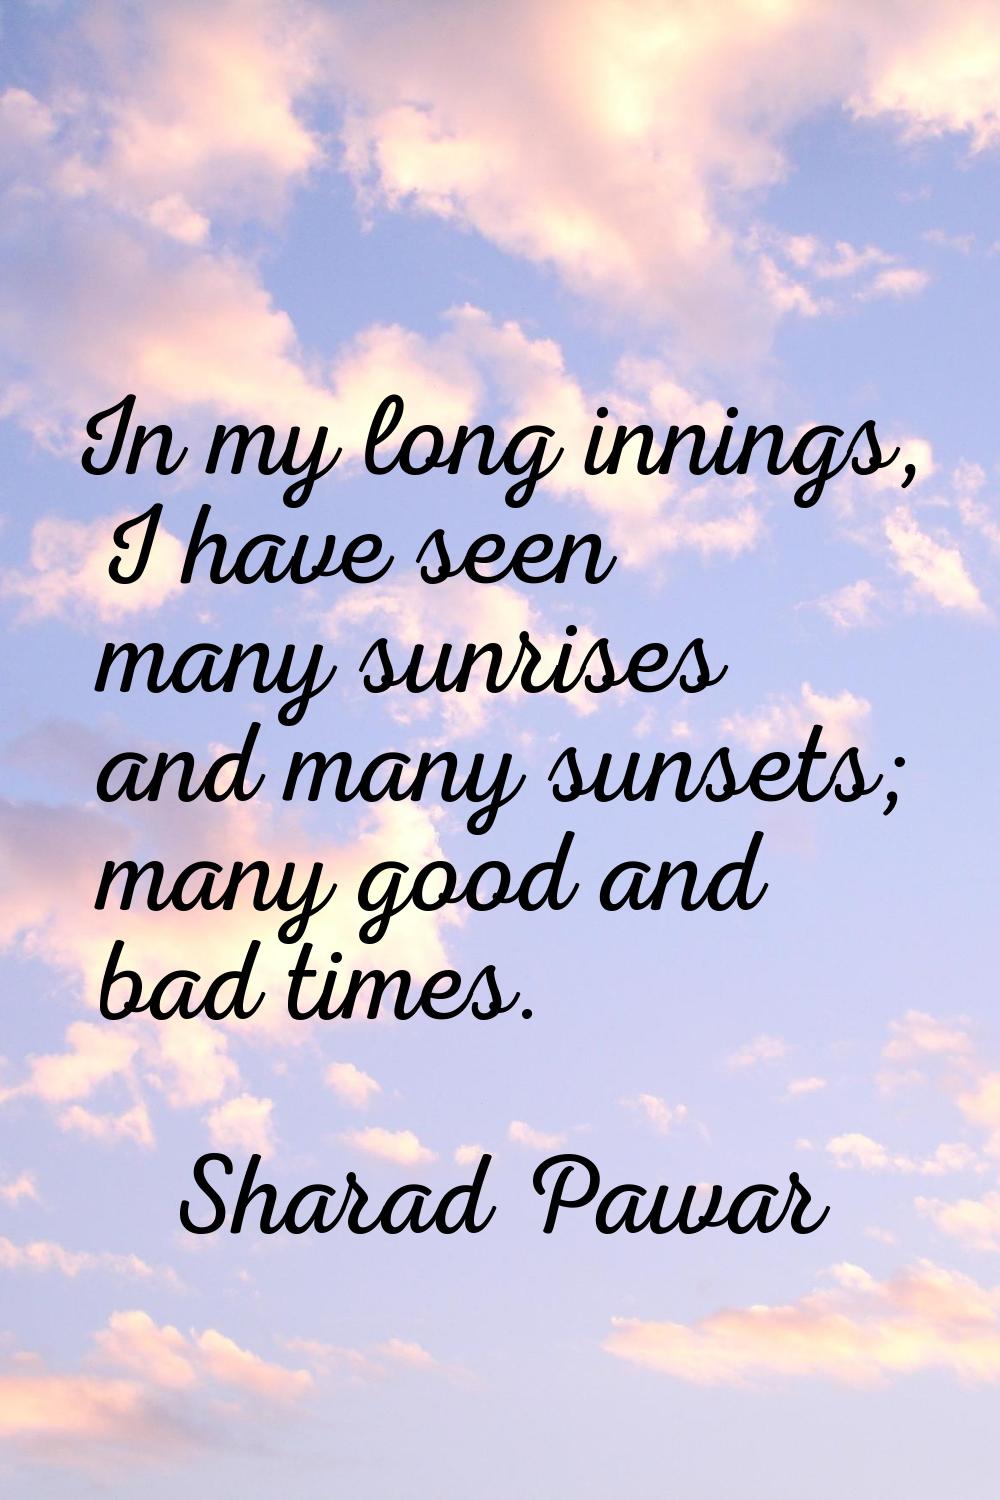 In my long innings, I have seen many sunrises and many sunsets; many good and bad times.